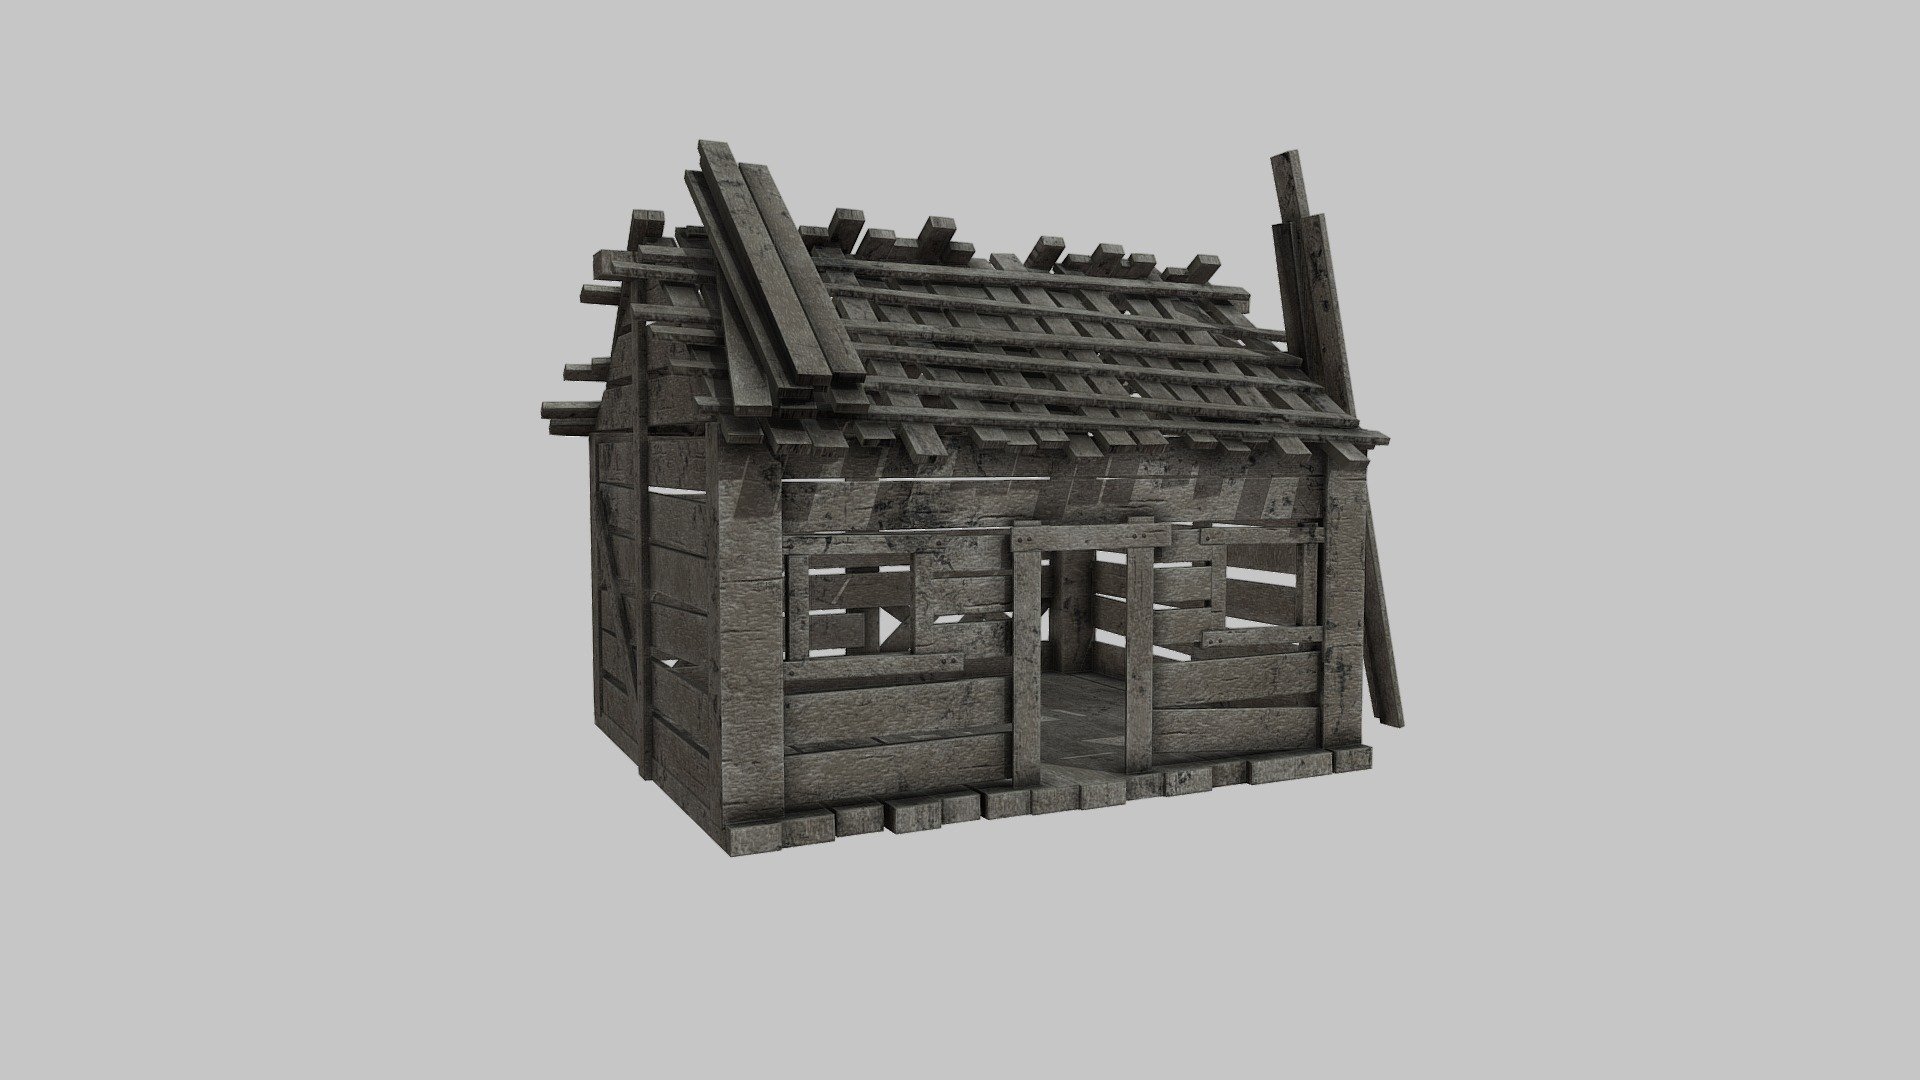 Features:




Low poly

Game ready

Optimized

Grouped and nomed parts

All formats tested and working

Textures included and material aplied

Easy to modify

Texture PBR MetalRough 2048x2048
 - Old House wooden - Download Free 3D model by wagnerlima07 3d model